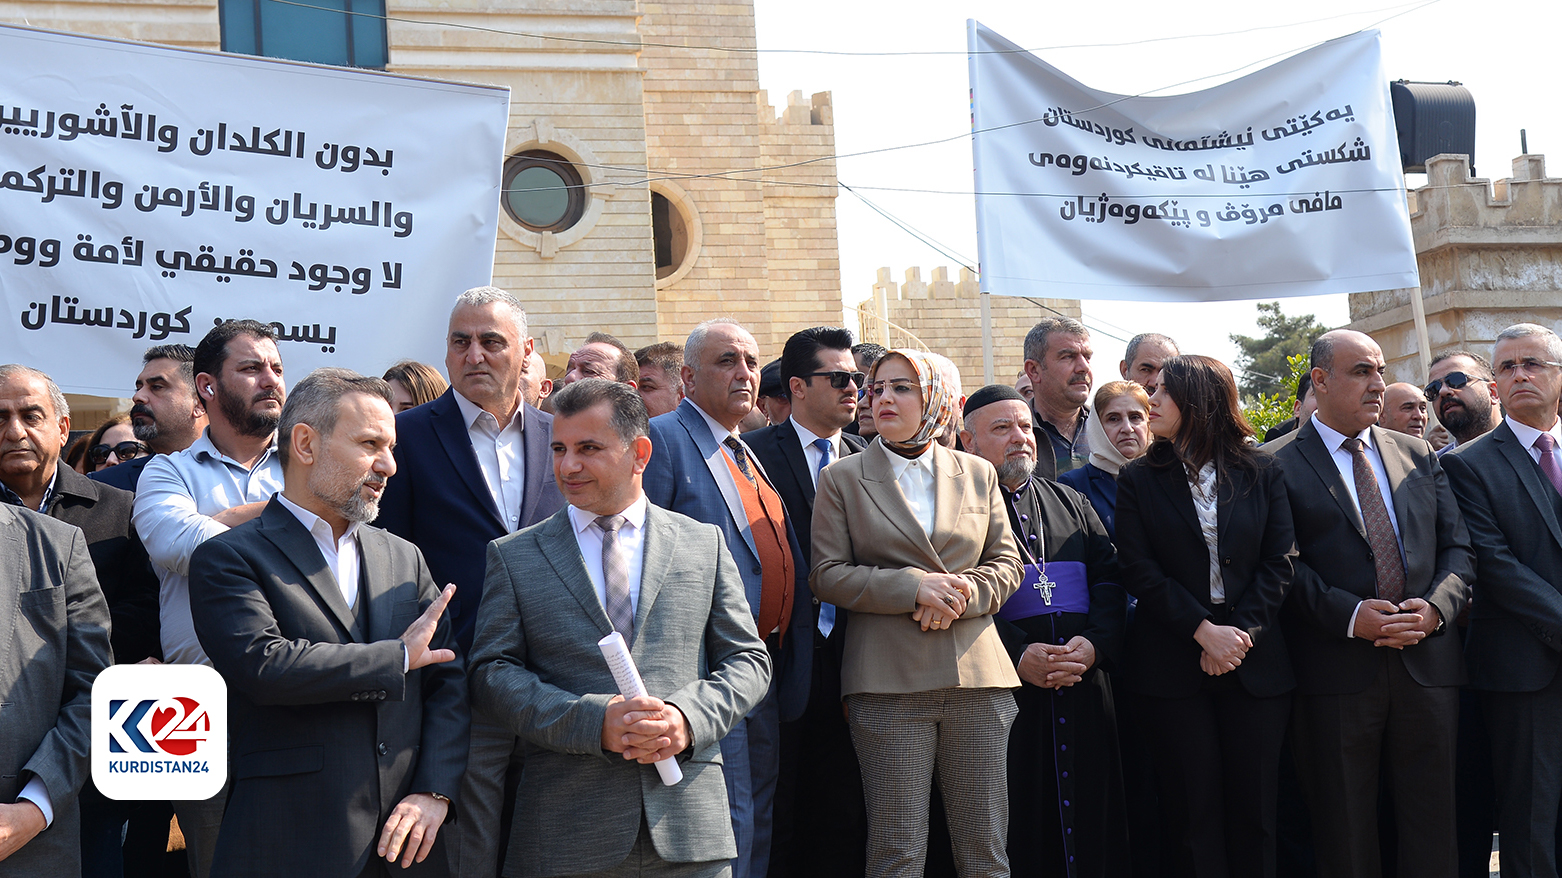 An image from the gathering of the representatives of ethnic and religious communities. (Photo: Kurdistan 24)